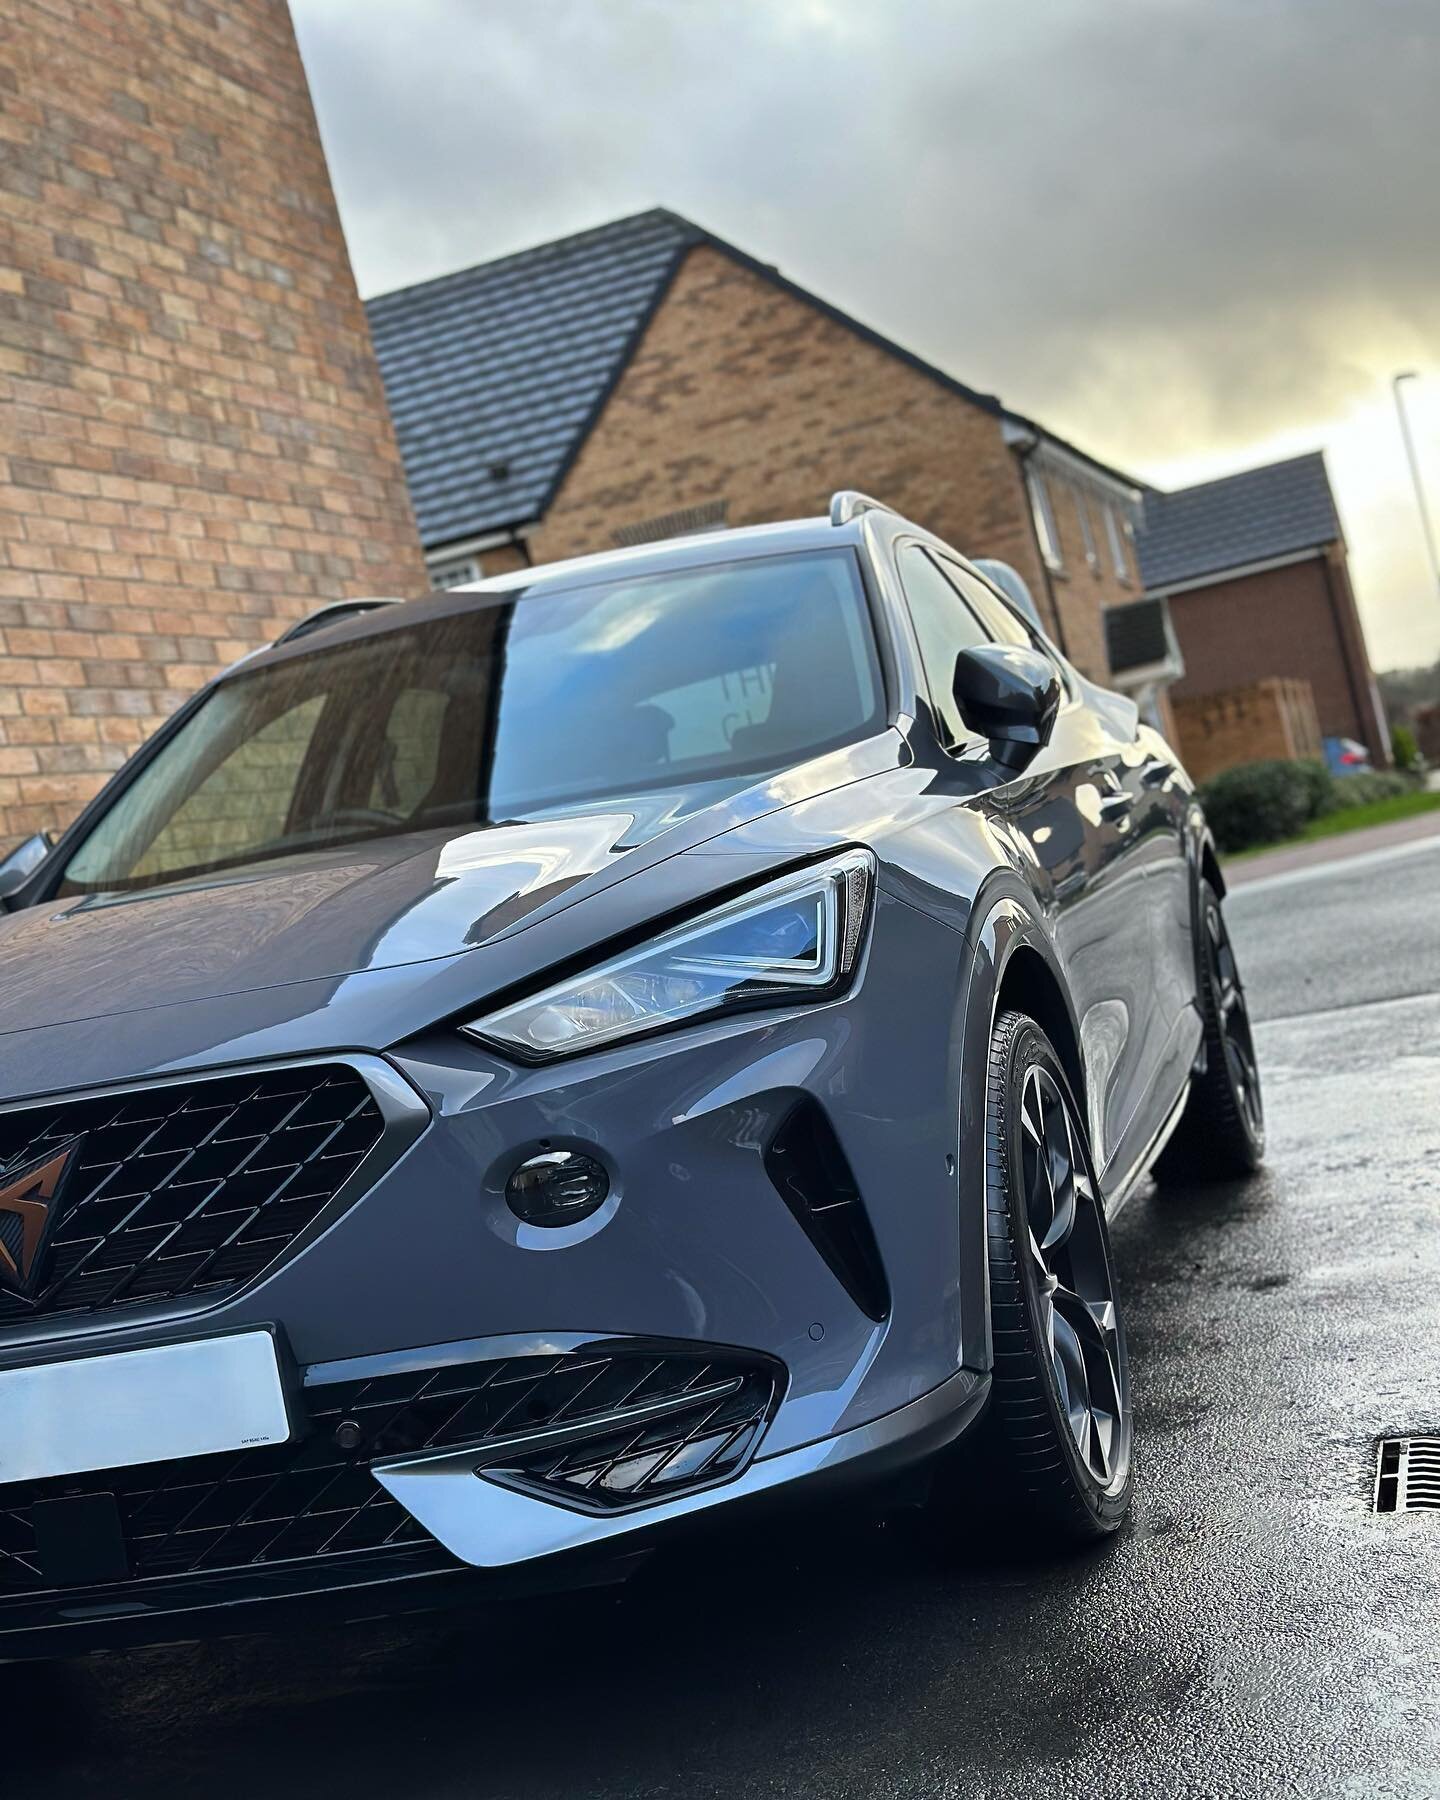 It&rsquo;s no accident that the finish on our client&rsquo;s vehicles are all flawless! 

#thecarcleaningco #cupra #cupraformentor #mobilevaleting #detailing #ribblevalley #lancashire #clitheroe #maintenance